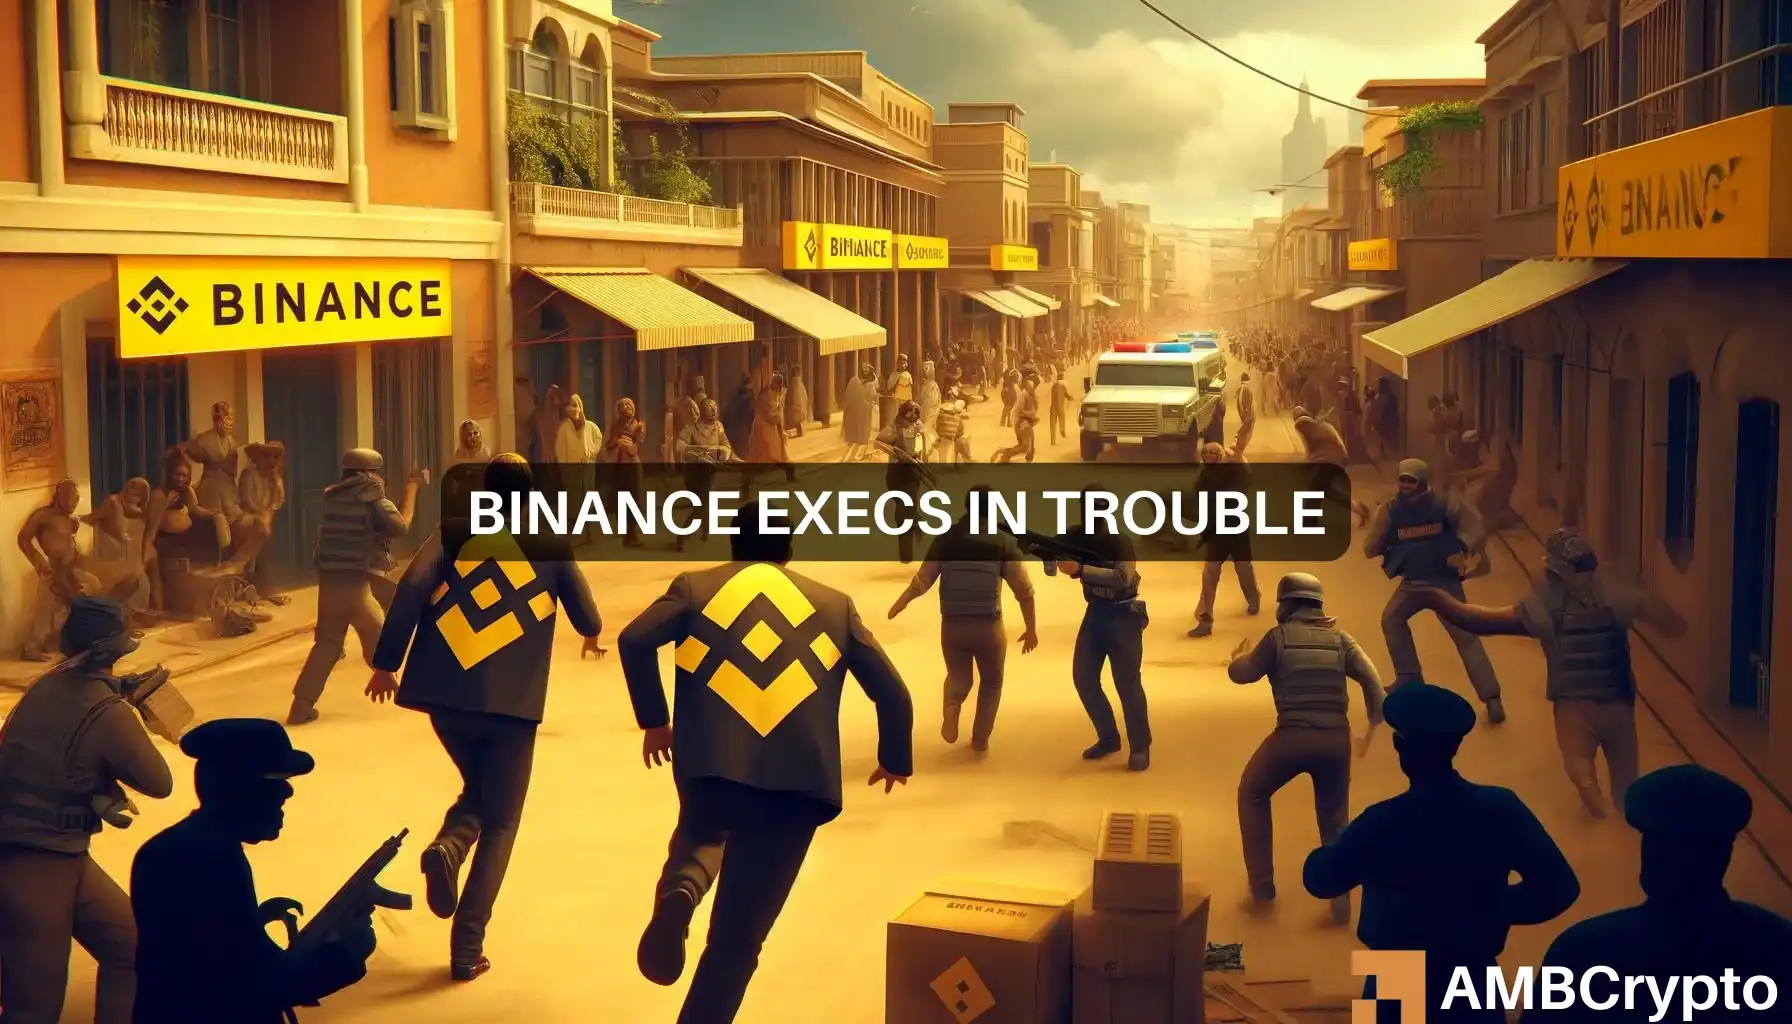 Binance: After CZ’s arrest, these execs prompt global ‘manhunt’